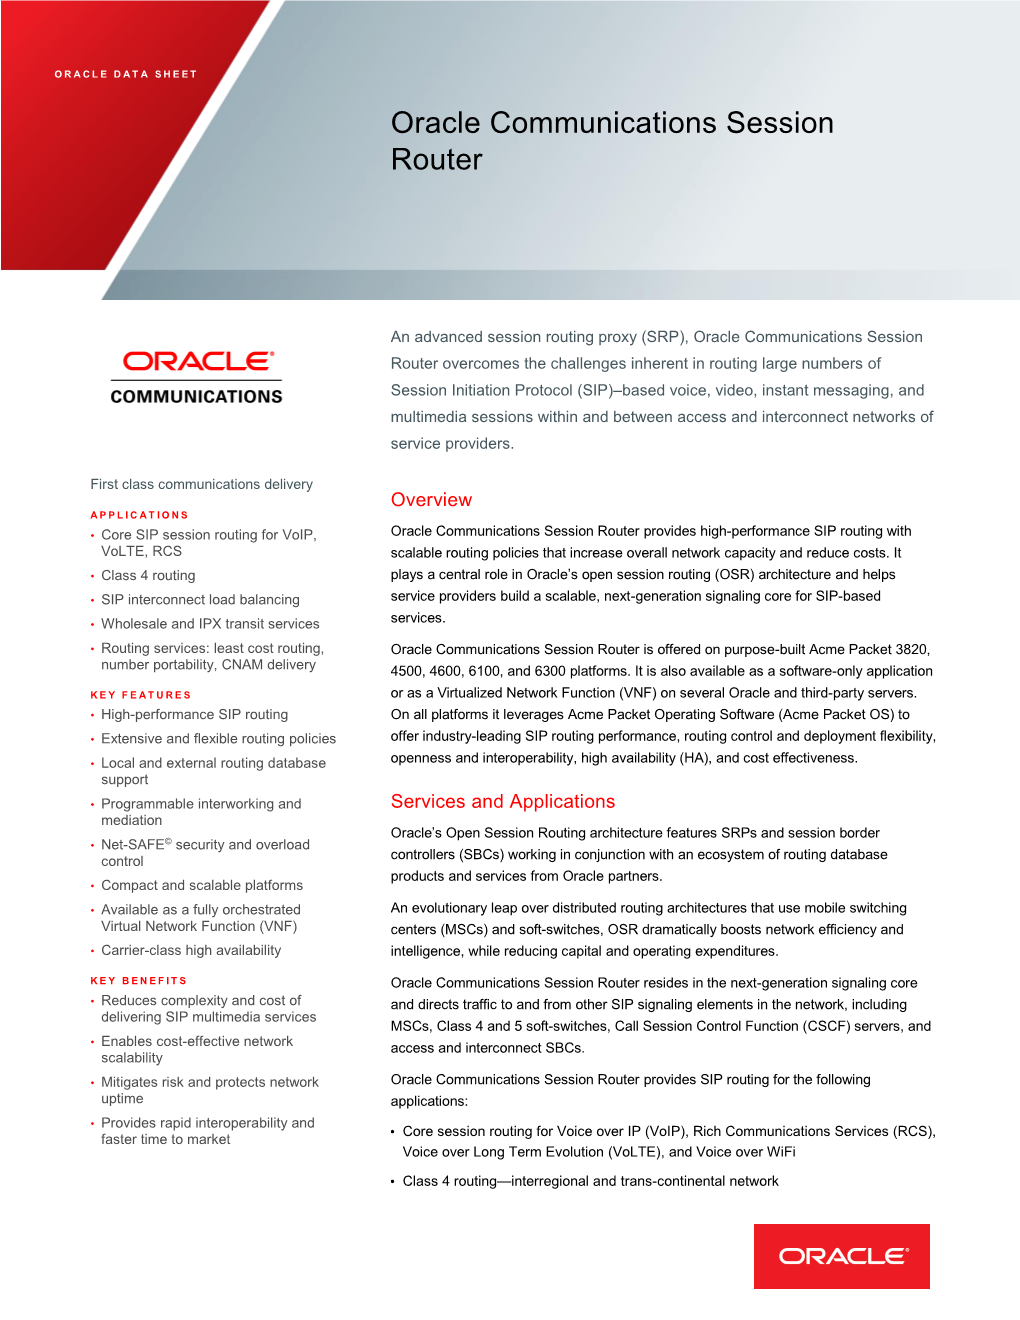 Oracle Communications Session Router